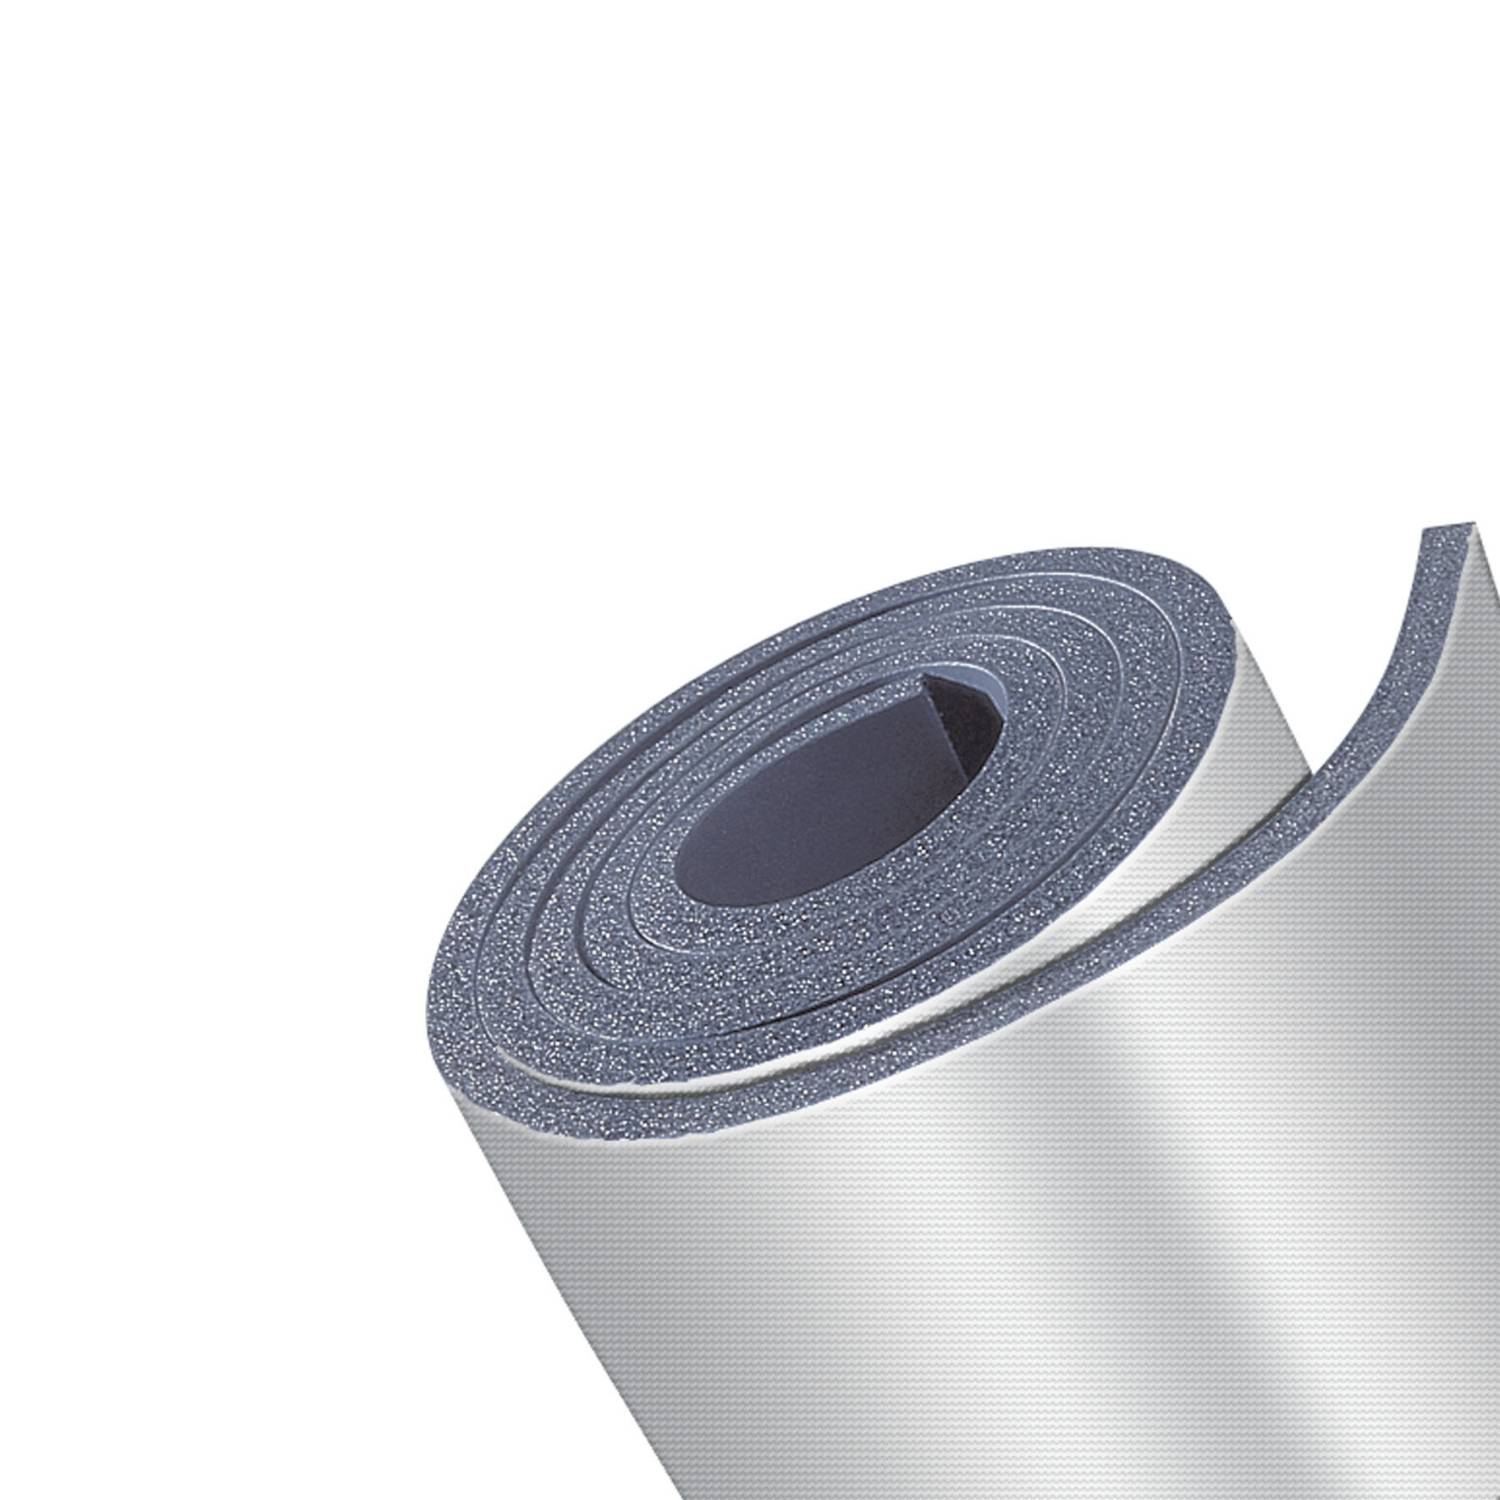 Kaiflex Protect Alu-NET Continuous Sheet Covering on Kaiflex ST - Closed cell rubber insulation